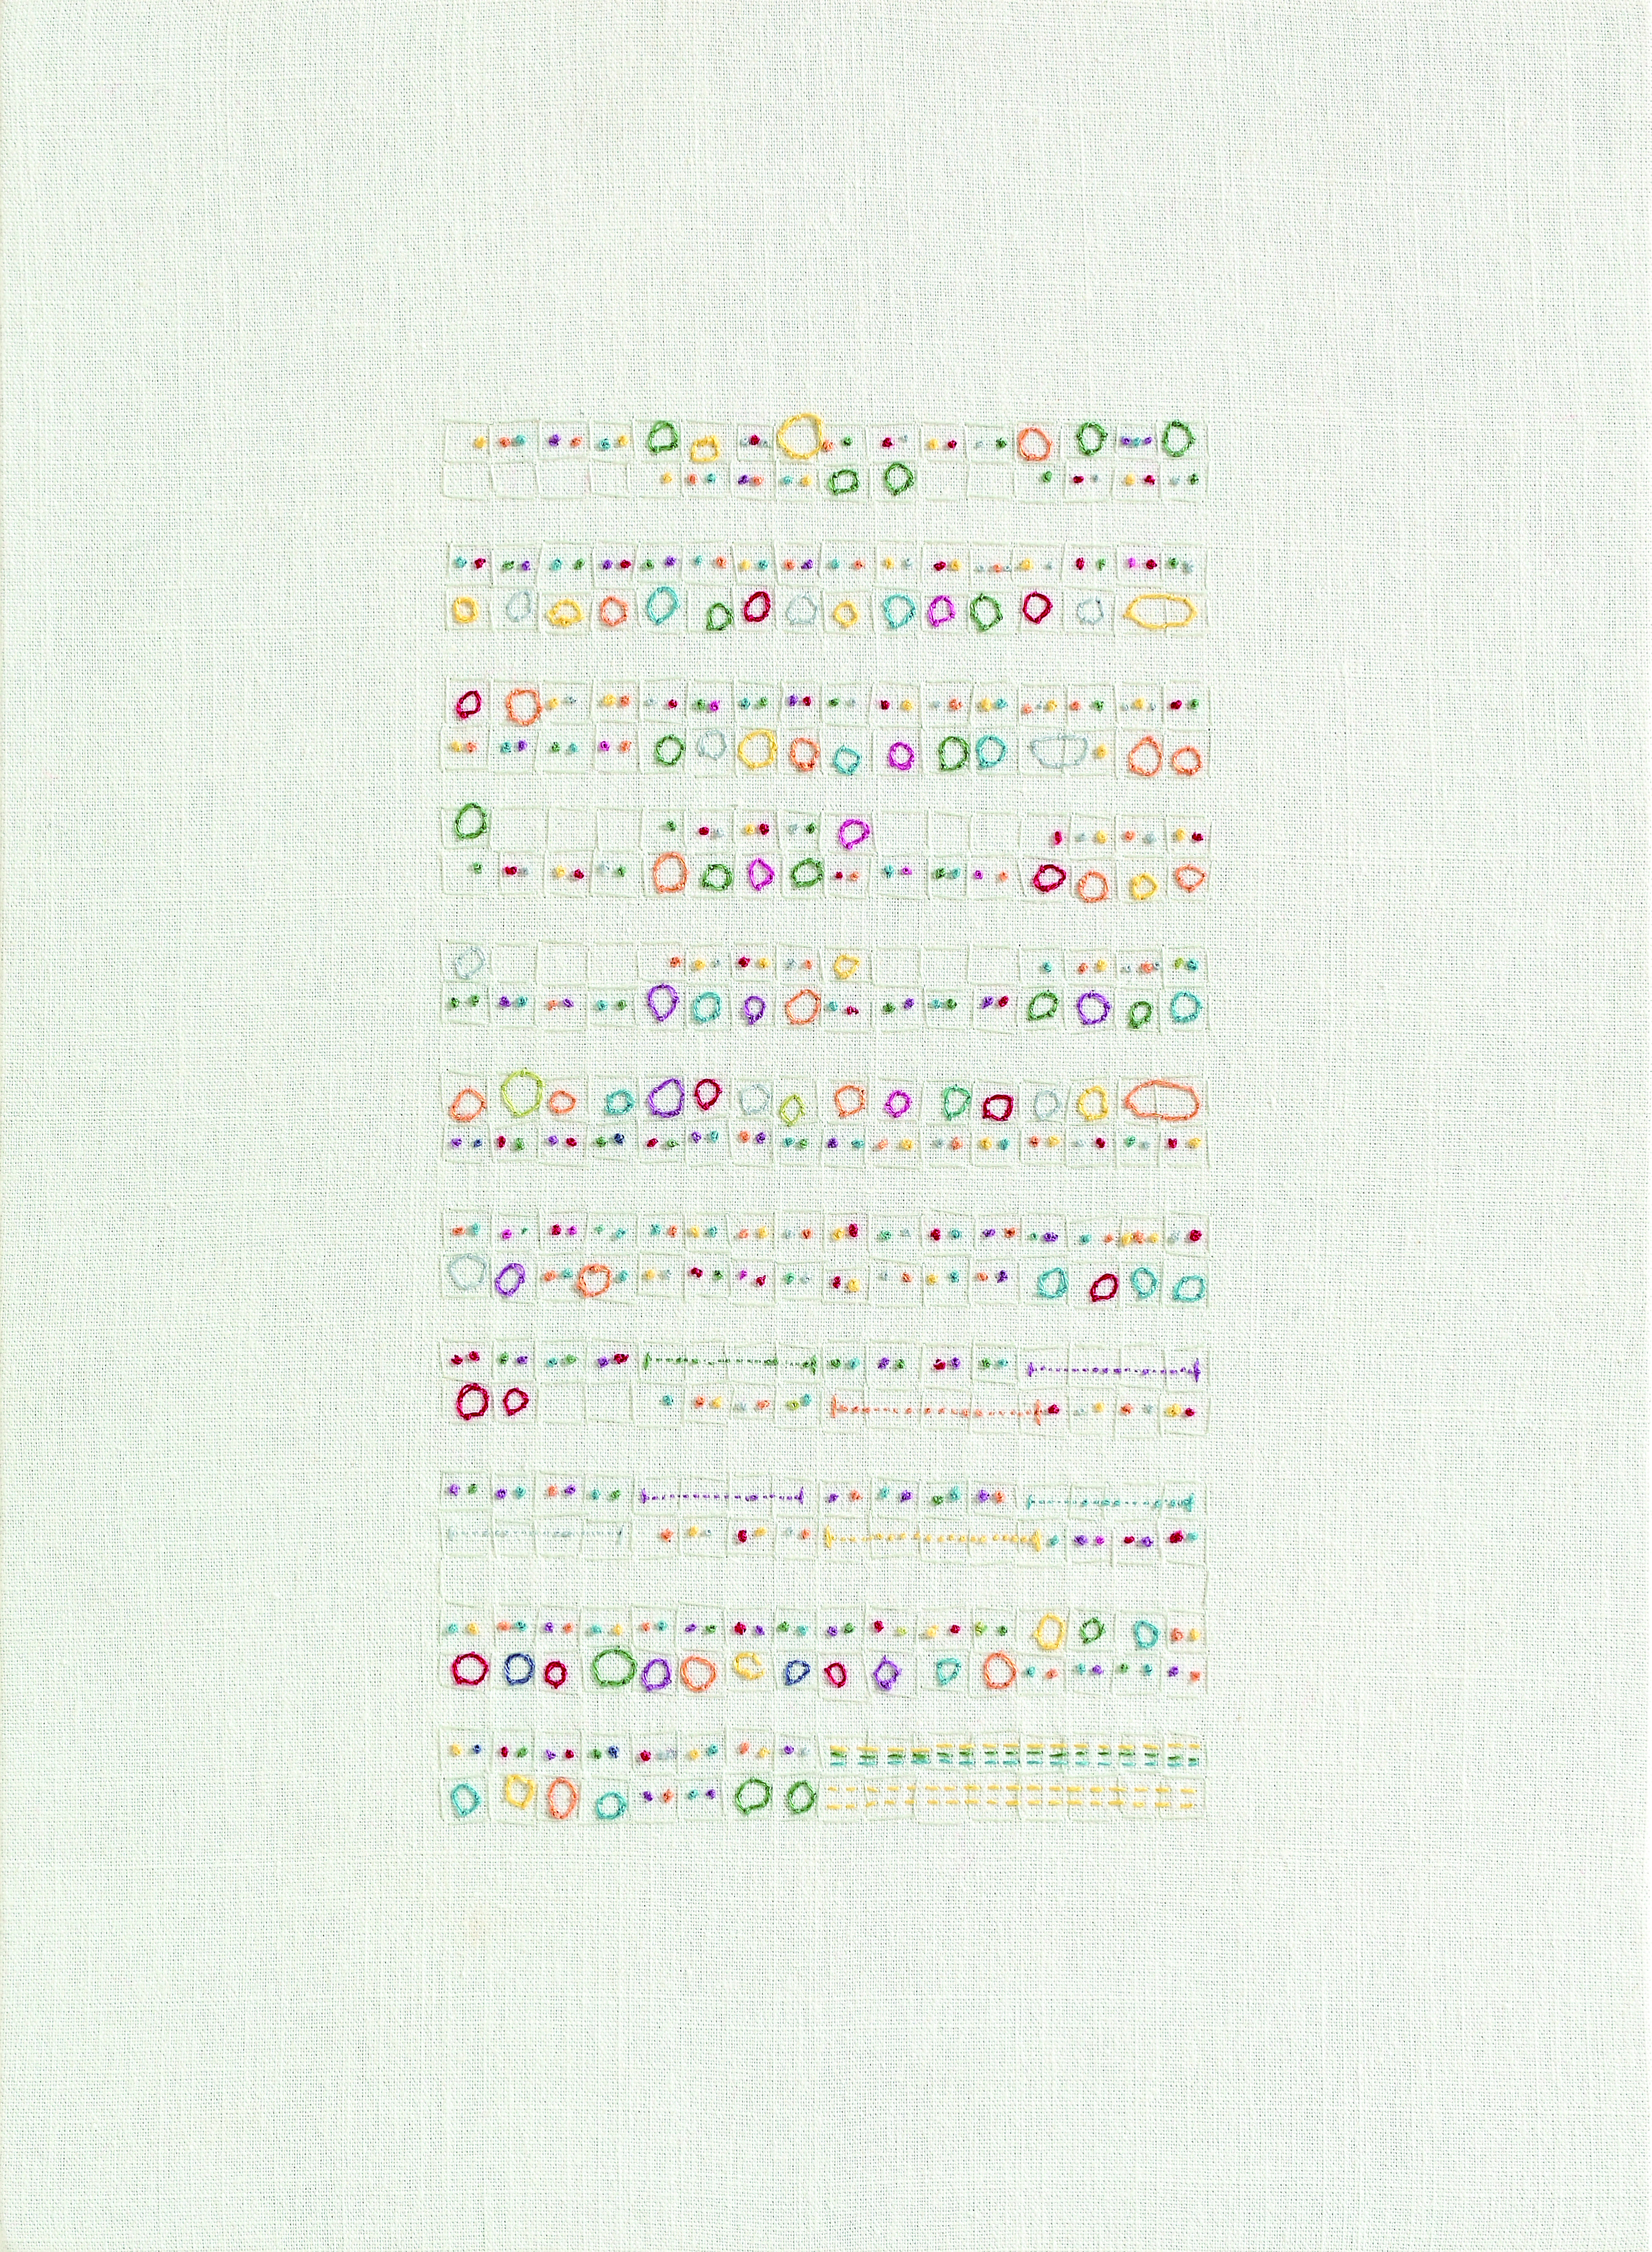 J.S.Bach-Invention No.1 in C Major BWV772(round), 2014, Thread on cloth, 30.0x41.0cm